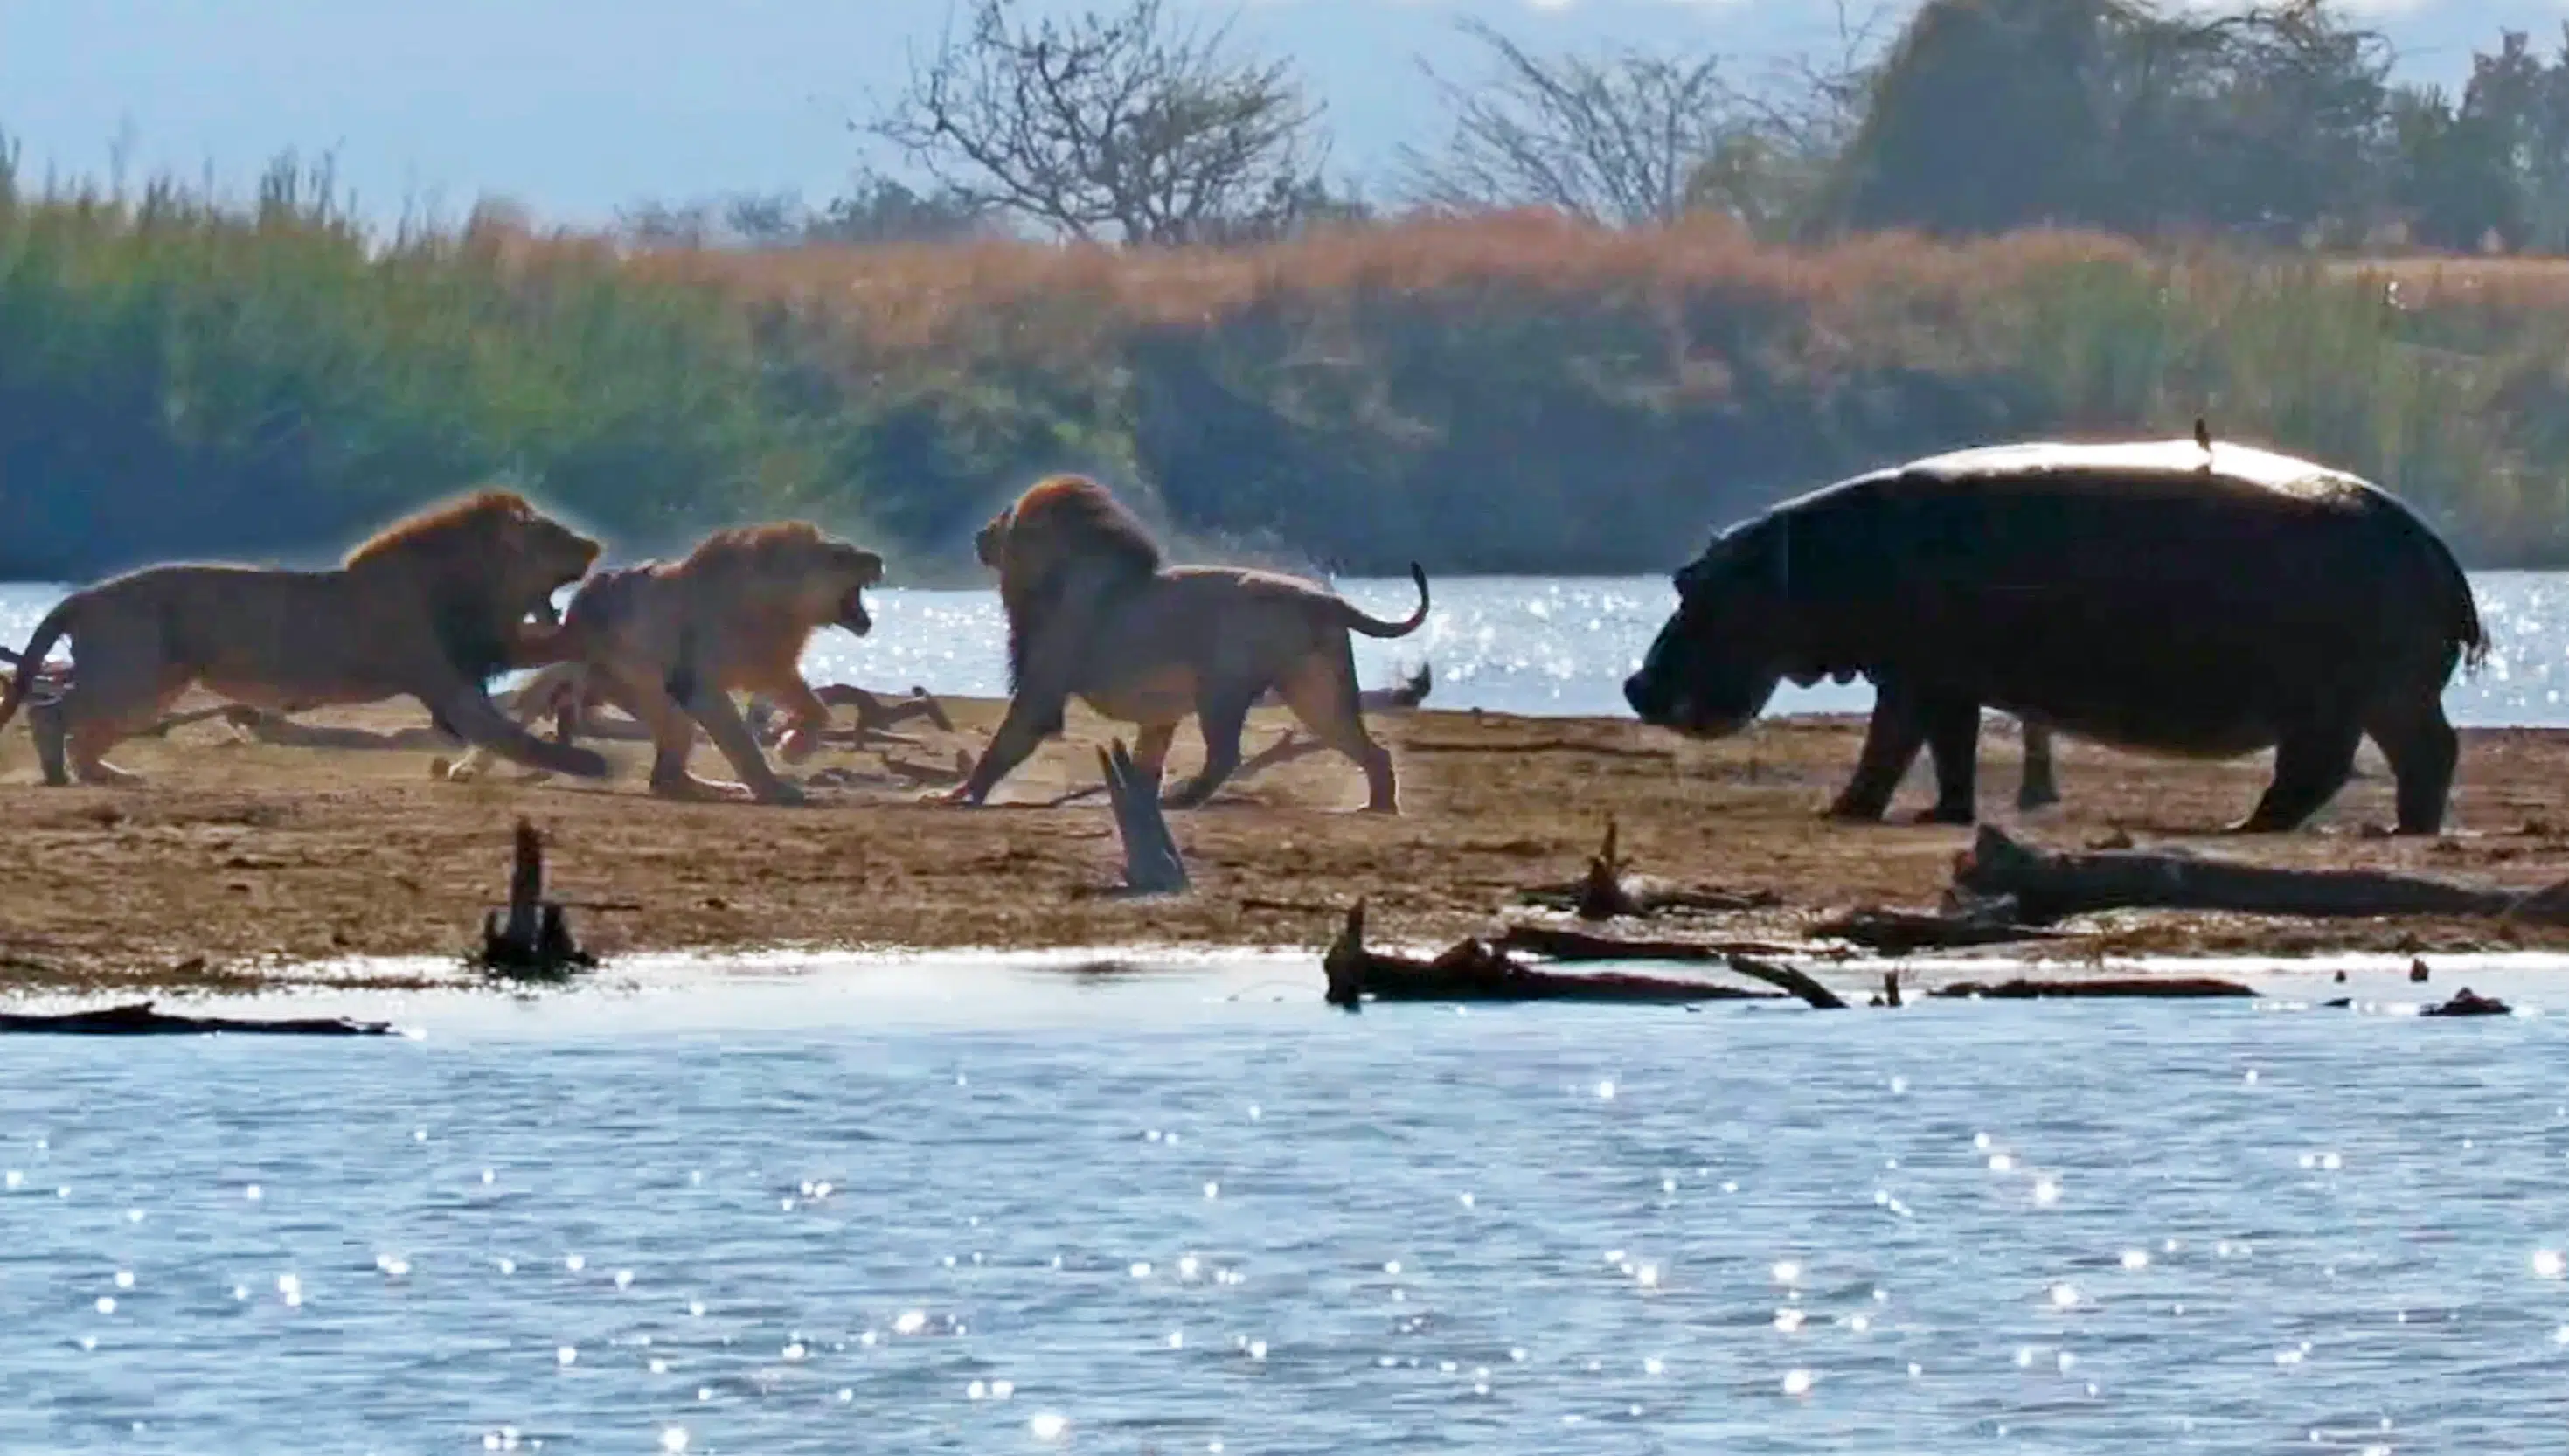 3 Male Lions Attacking Another Lion Get Interrupted by Elephants and Hippos